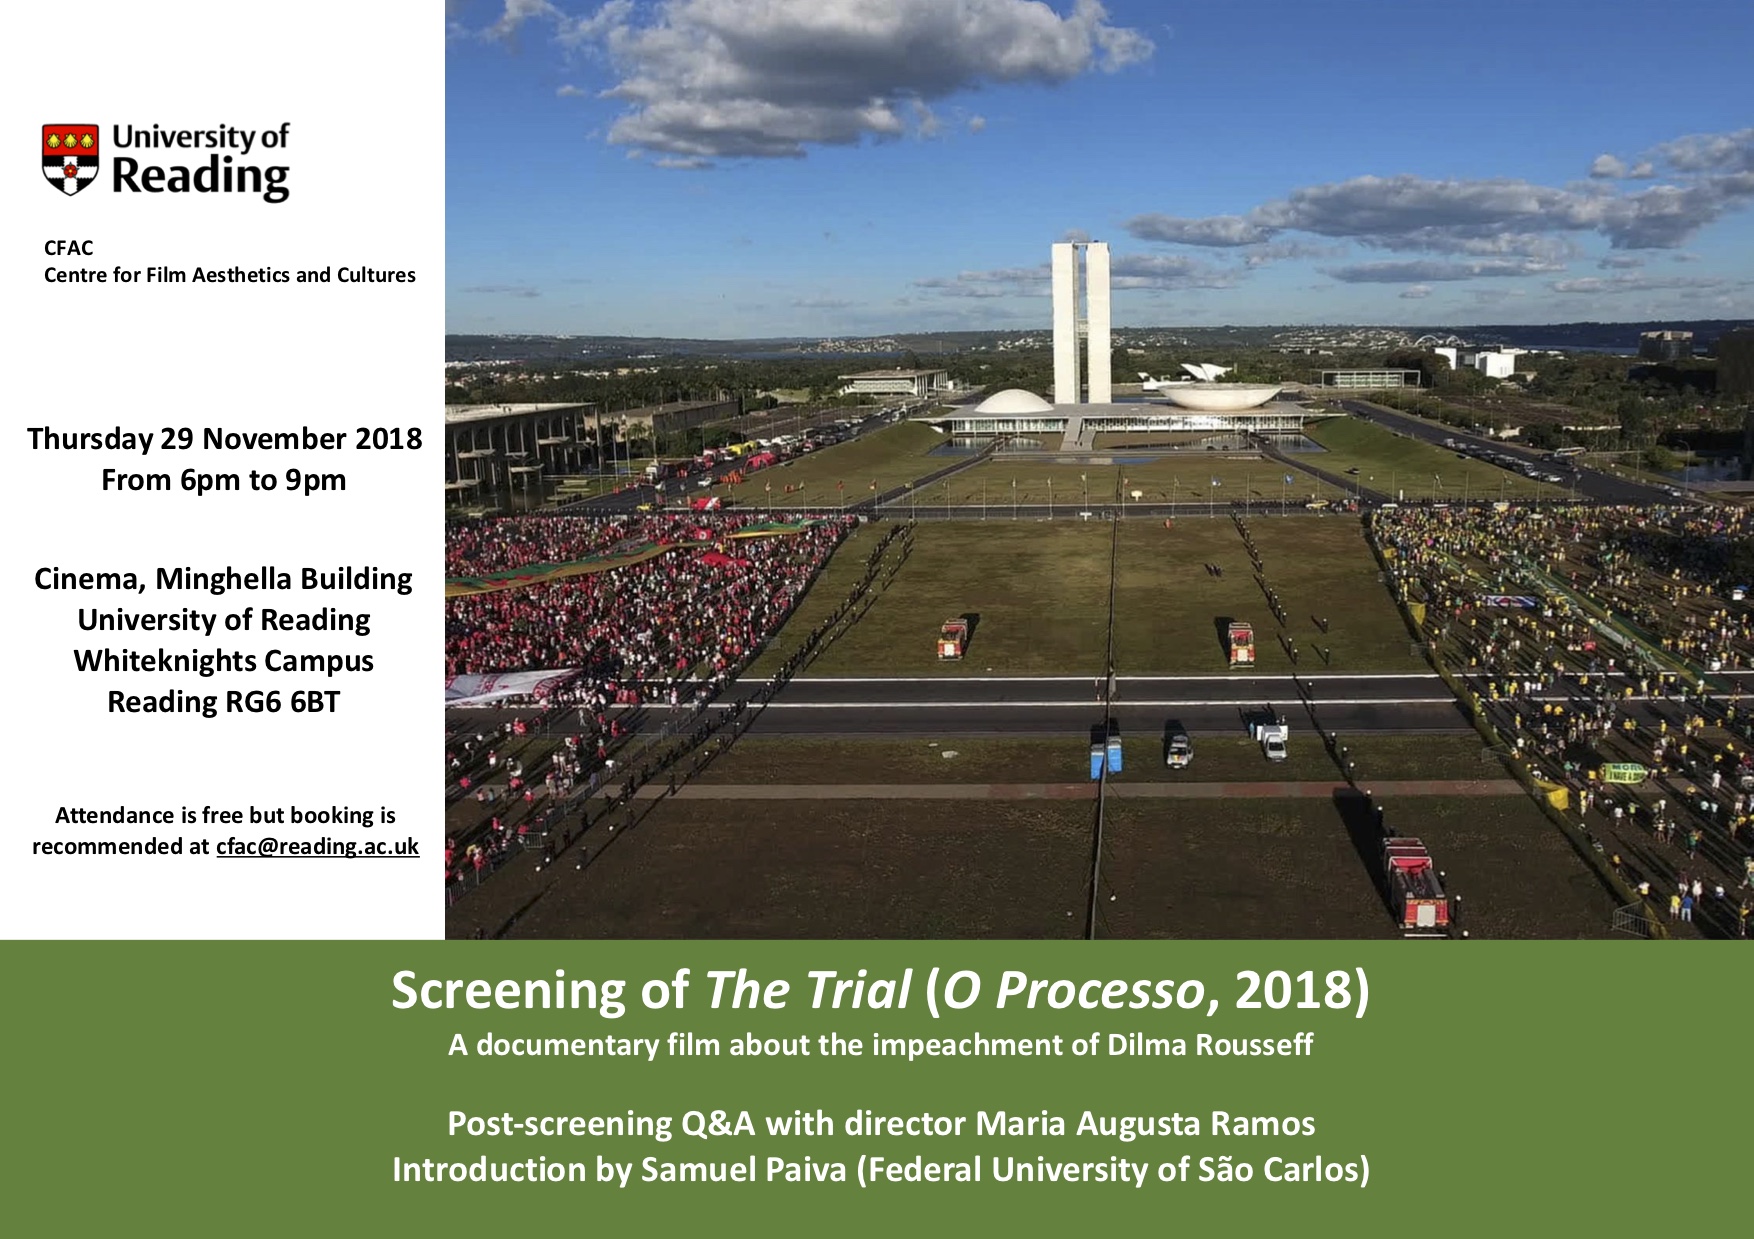 Screening of The Trial (O Processo, 2018), and Q&A with Maria Augusta Ramos